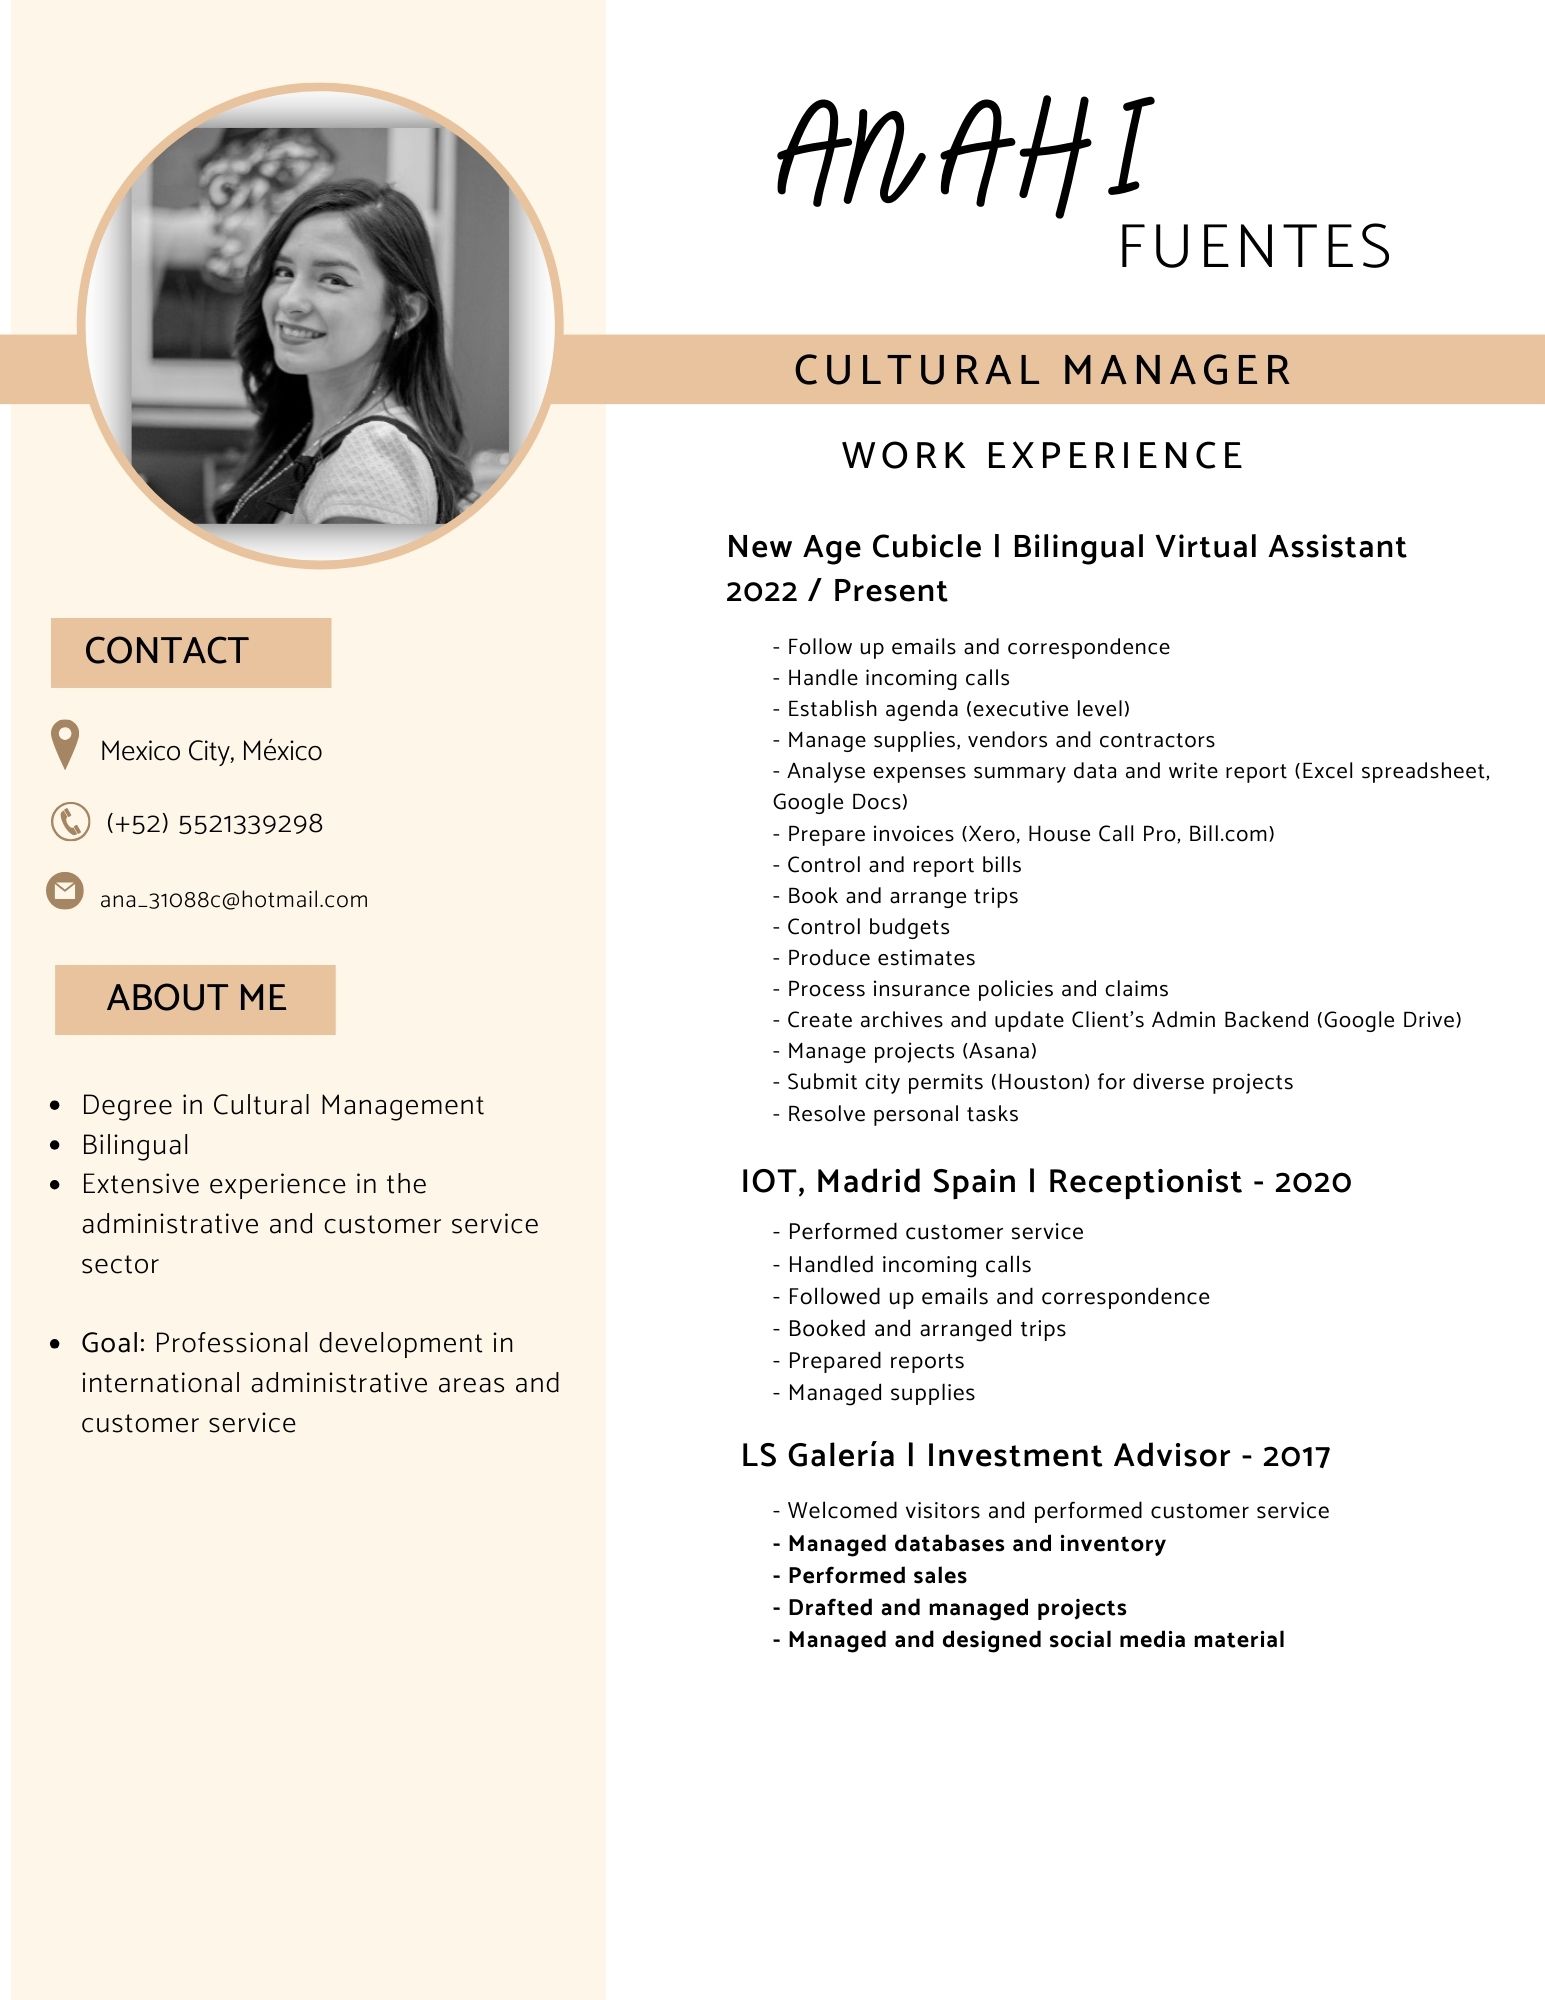 Afi

FUENTES

CULTURAL MANAGER

WORK EXPERIENCE

 

New Age Cubicle | Bilingual Virtual Assistant
2022 / Present

CONTACT - Follow up emails and correspondence
- Handle incoming calls
- Establish agenda (executive level)
9 Mexico City, México - Manage supplies, vendors and contractors
- Analyse expenses summary data and write report (Excel spreadsheet
Google Docs)

A) =r
® (+52) 5521339298 - Prepare invoices (Xero, House Call Pro, Bill.com)
- Control and report bills
© ana_31088c@hotmail.com - Book and arrange trips

- Control budgets
- Produce estimates
ABOUT M E - Process insurance policies and claims
- Create archives and update Client's Admin Backend (Google Drive)
- Manage projects (Asana)
- Submit city permits (Houston) for diverse projects

e Degree in Cultural Management - Resolve personal tasks

¢ Bilingual

« Extensive experience in the 10T, Madrid Spain | Receptionist - 2020
administrative and customer service - Performed customer service
sector - Handled incoming calls

- Followed up emails and correspondence

. - Booked and arranged trips
* Goal: Professional development in 9 p
- Prepared reports

international administrative areas and - Managed supplies

customer service
LS Galeria | Investment Advisor - 2017

- Welcomed visitors and performed customer service
- Managed databases and inventory

- Performed sales

- Drafted and managed projects

- Managed and designed social media material